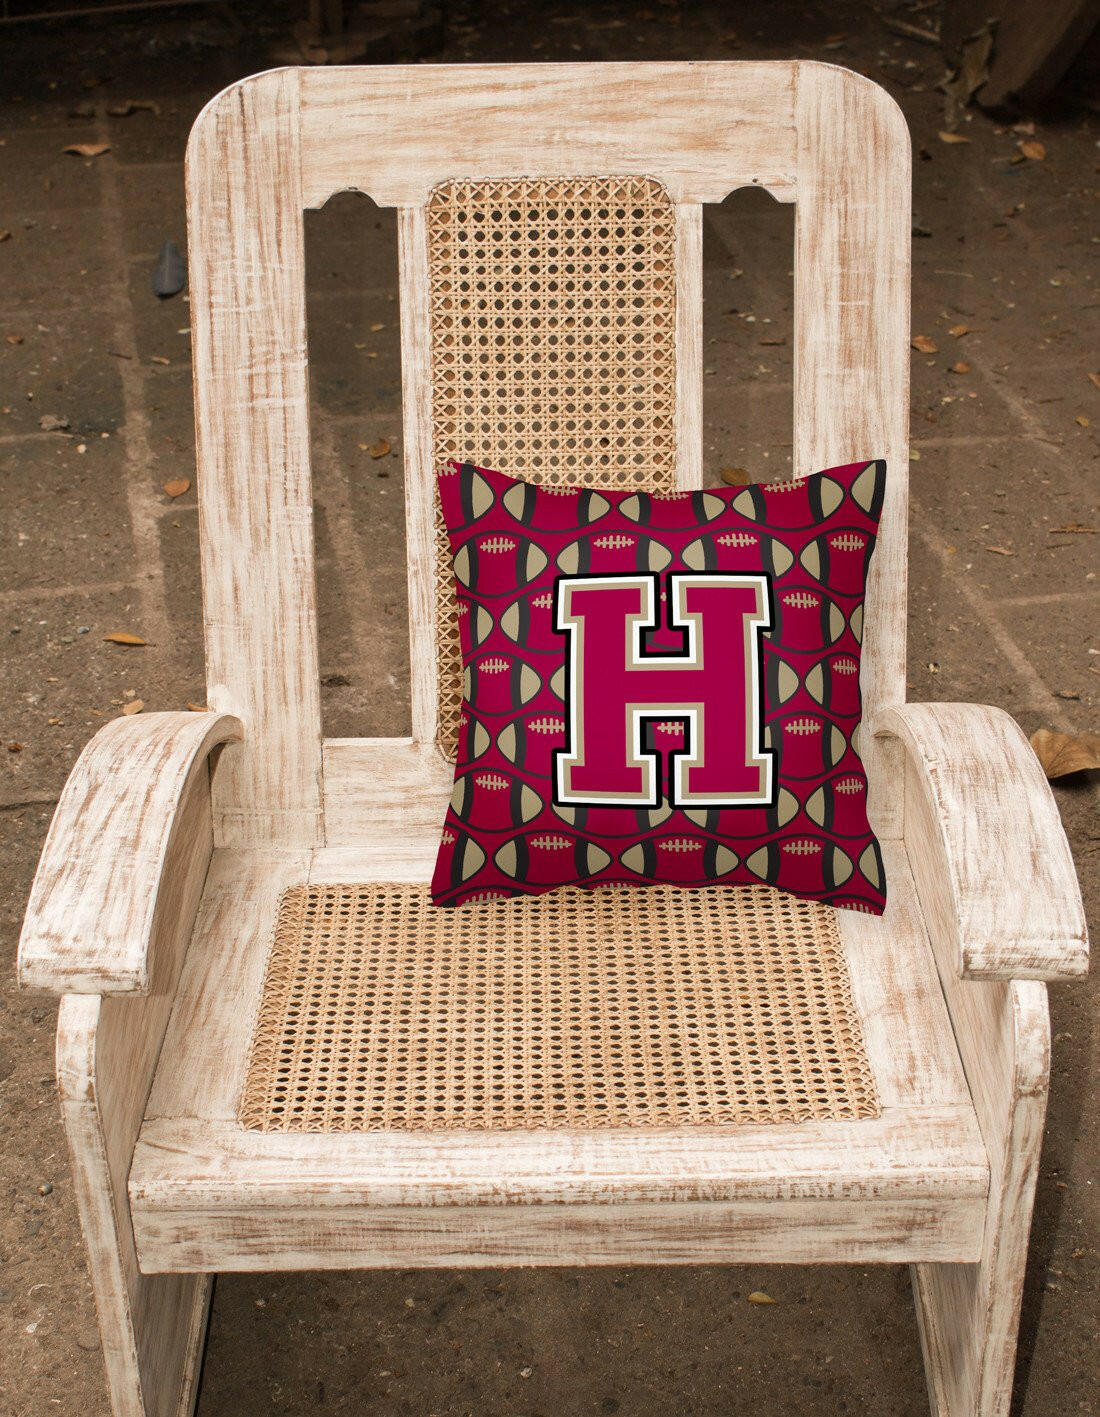 Letter H Football Garnet and Gold Fabric Decorative Pillow CJ1078-HPW1414 by Caroline's Treasures